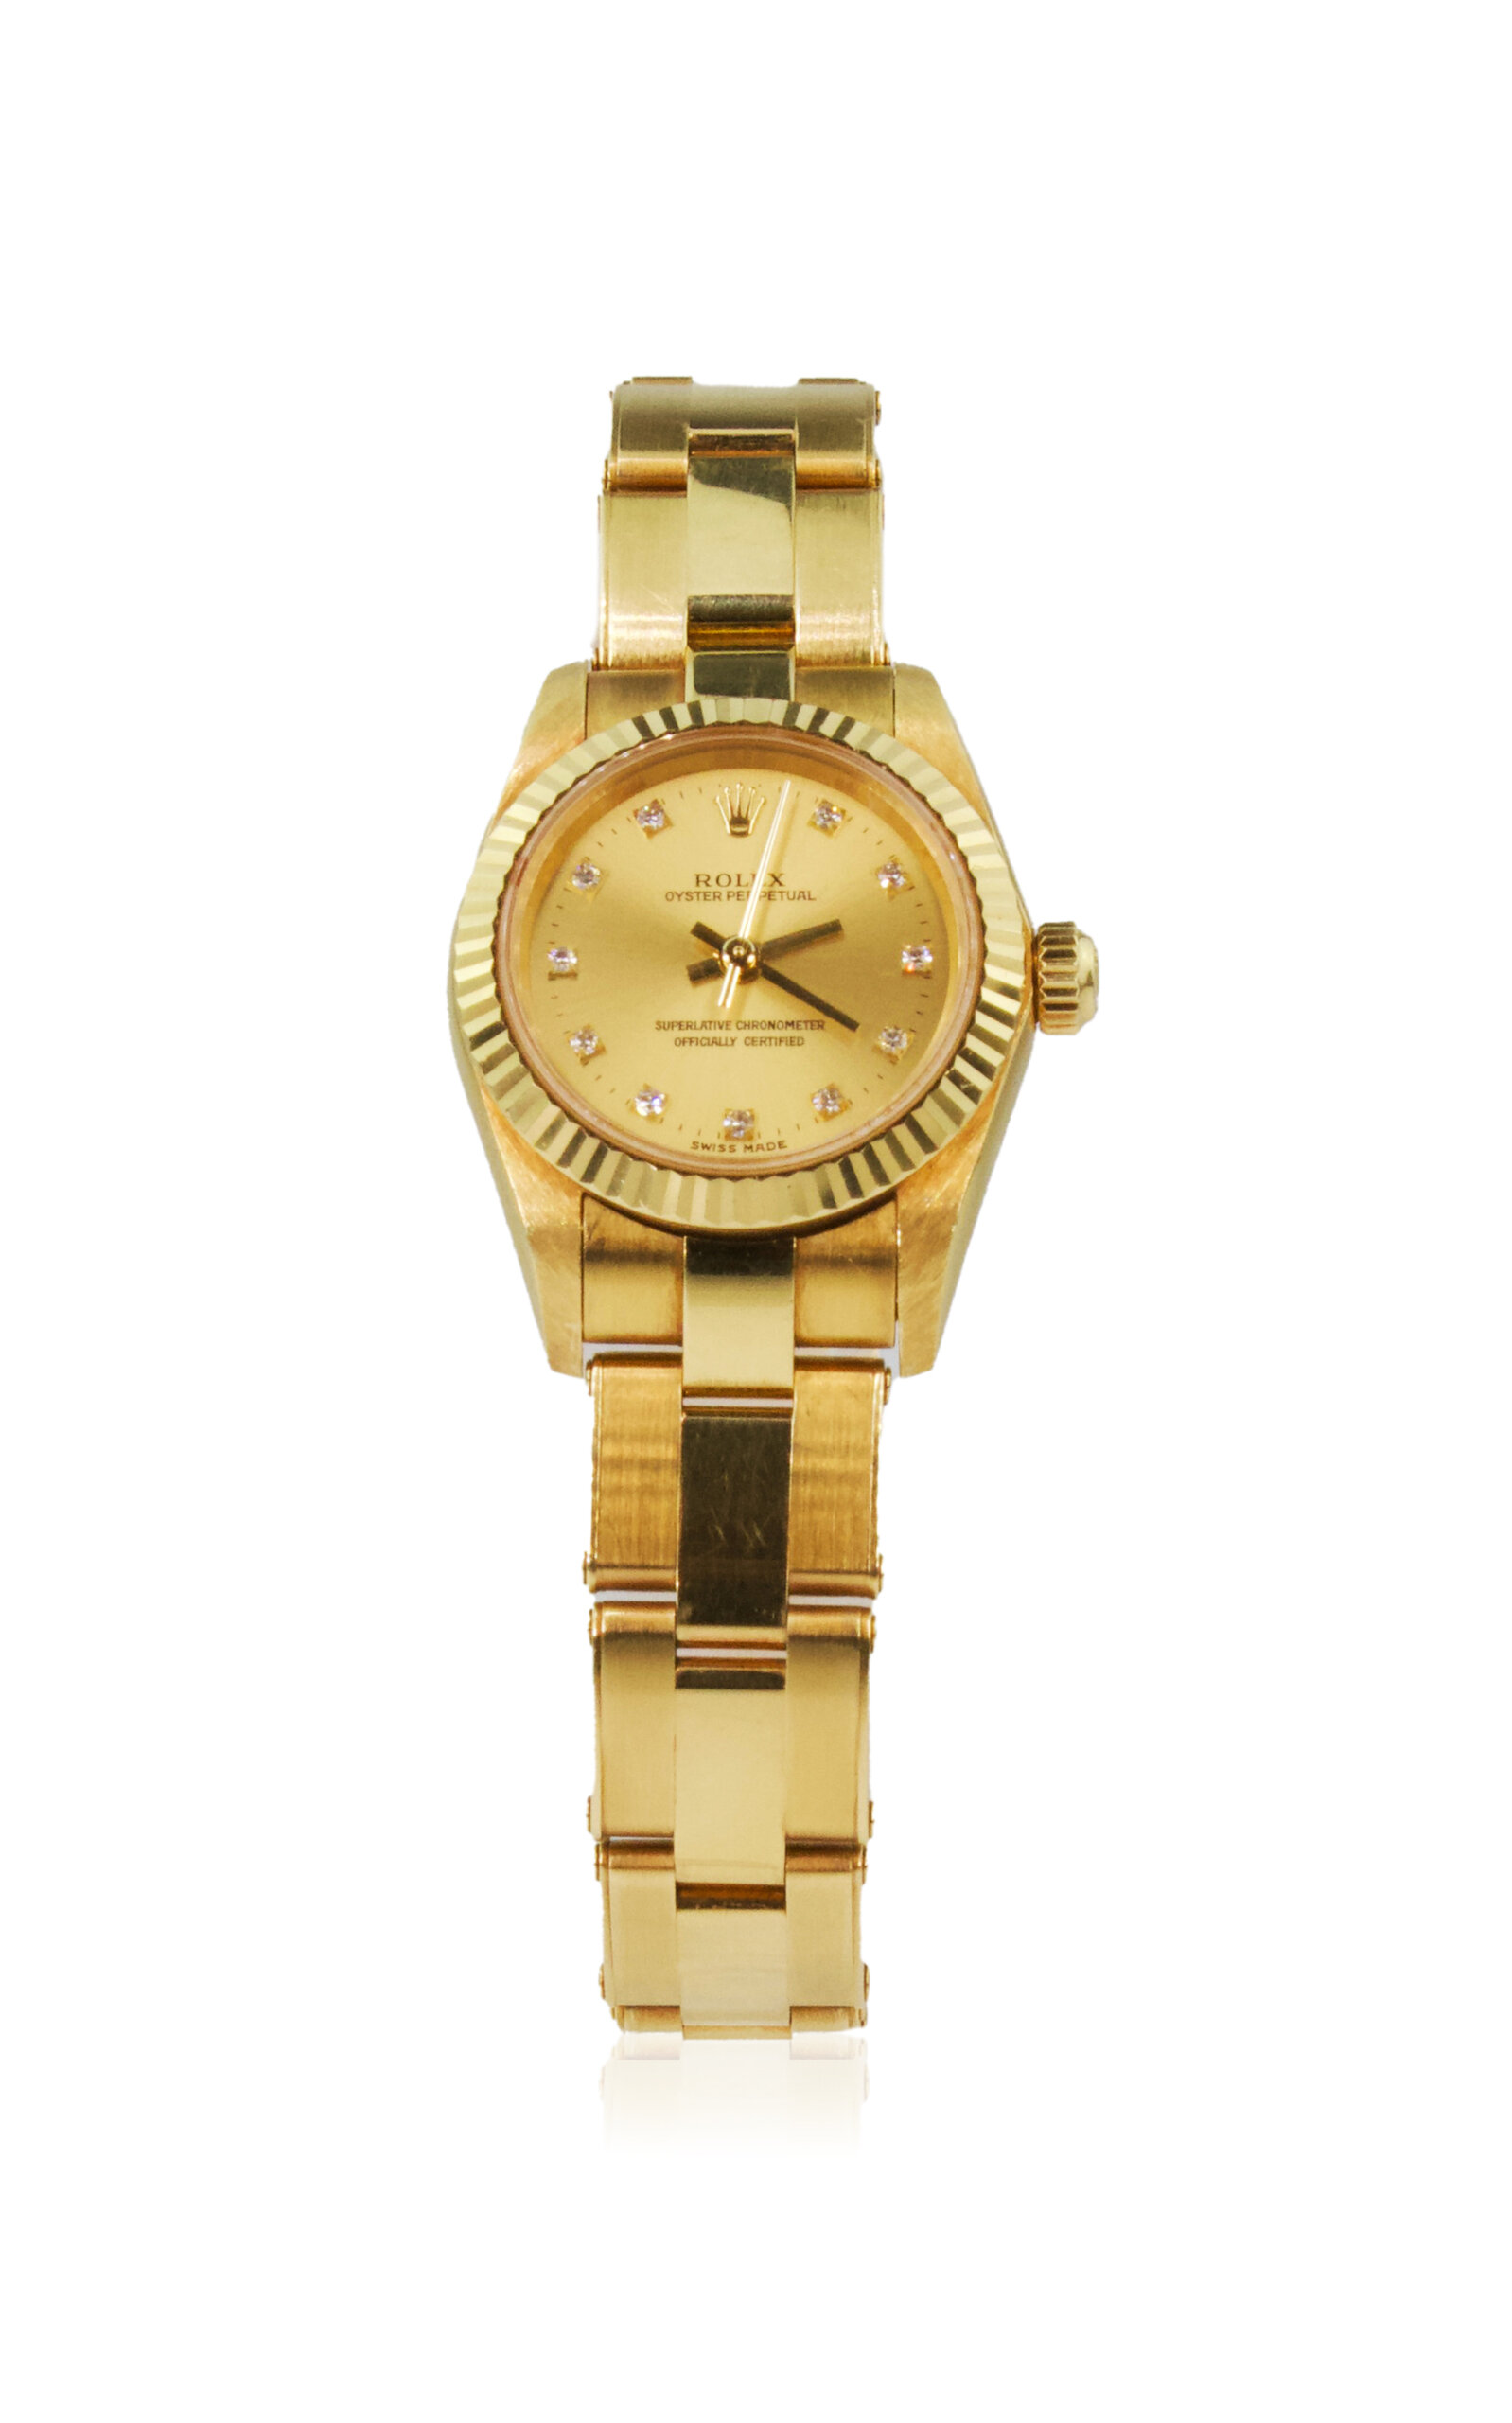 Private Label London Oyster Perpetual 18k Yellow Gold Diamond Watch